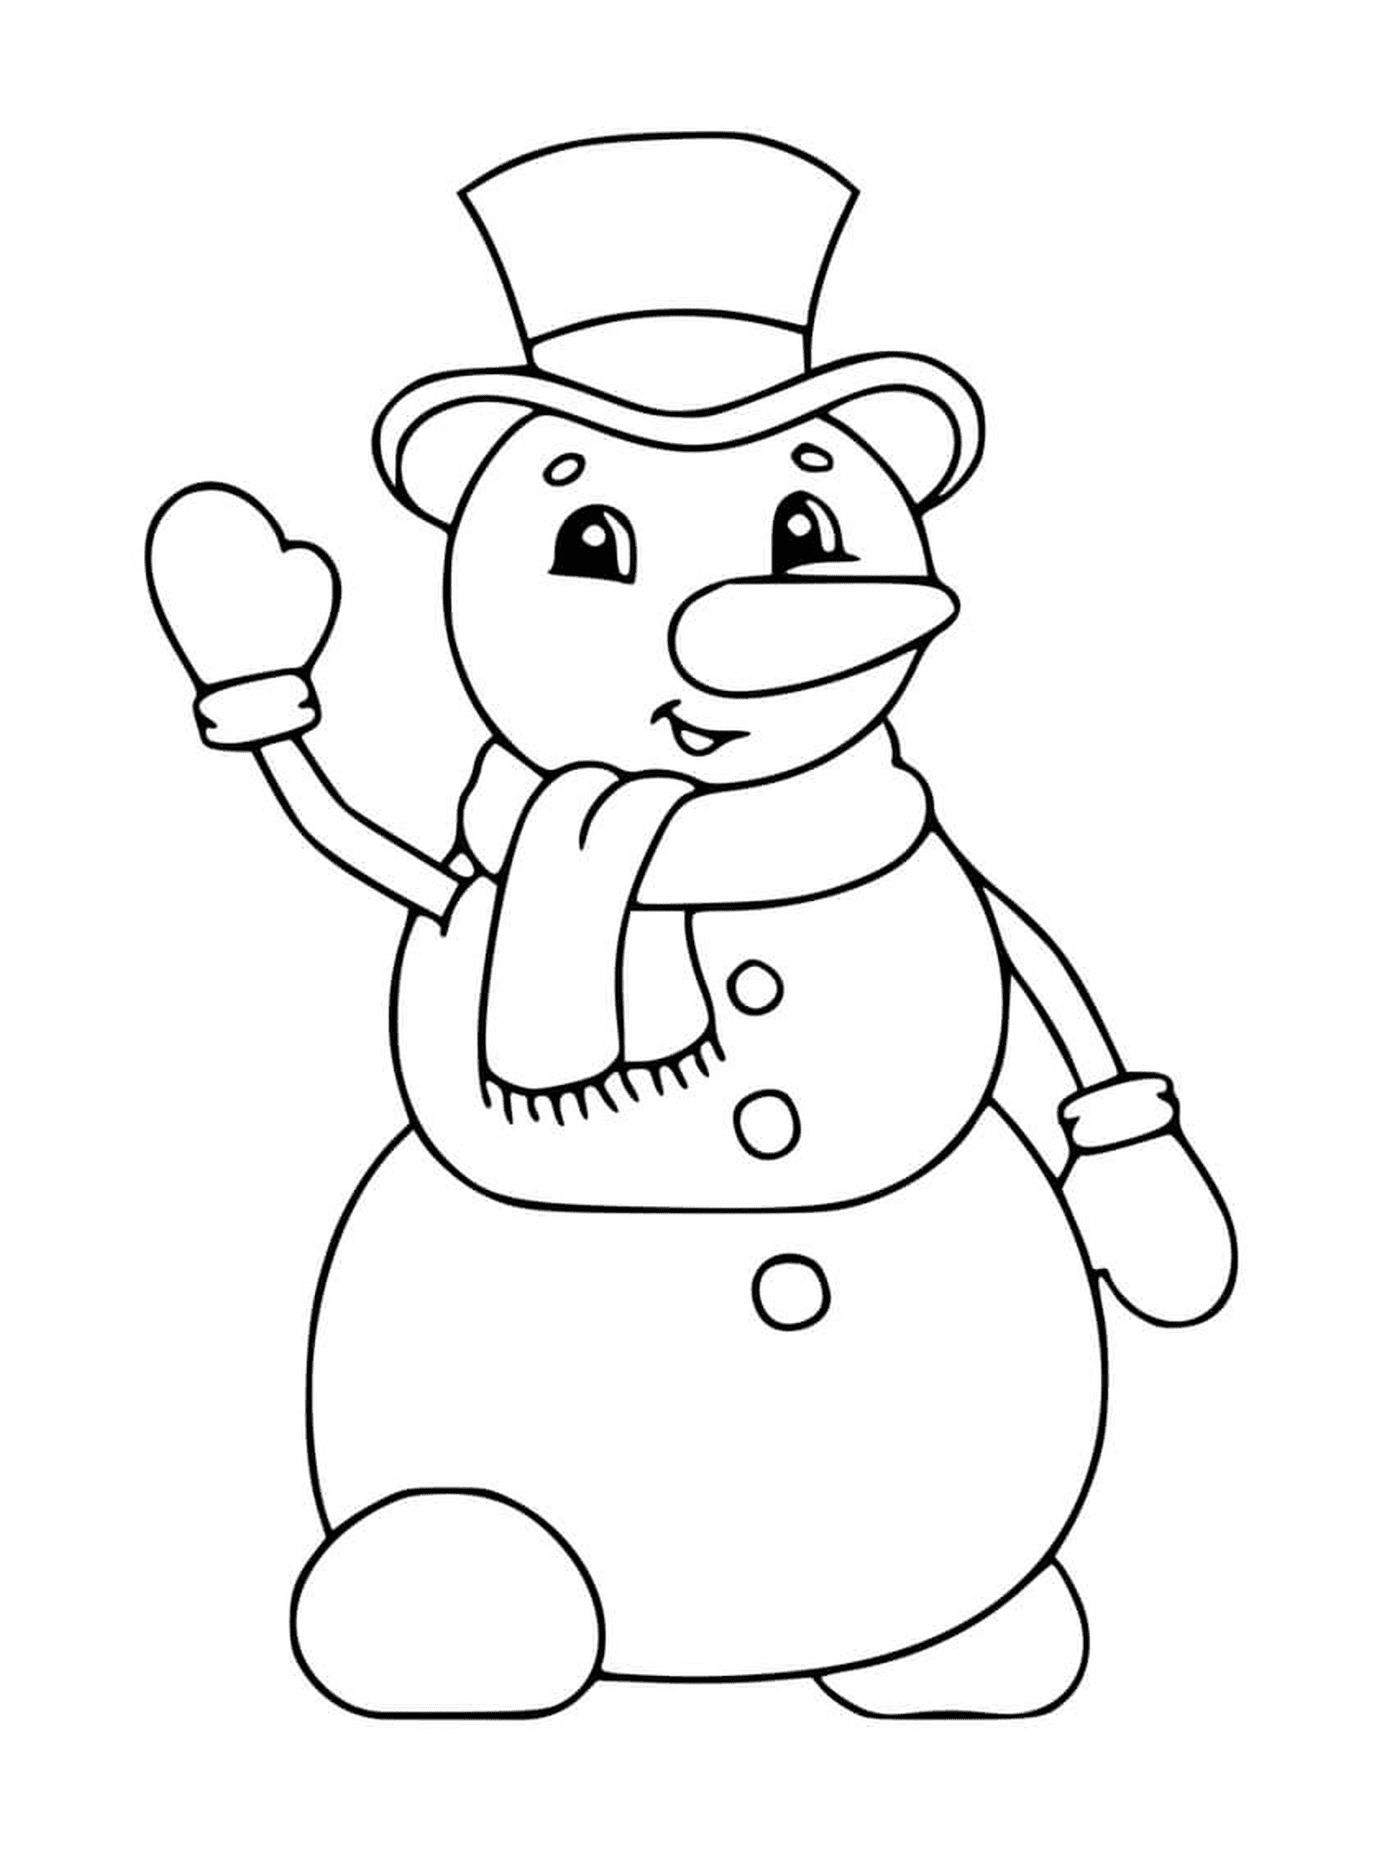  A snowman with a scarf and gloves to warm up in winter 